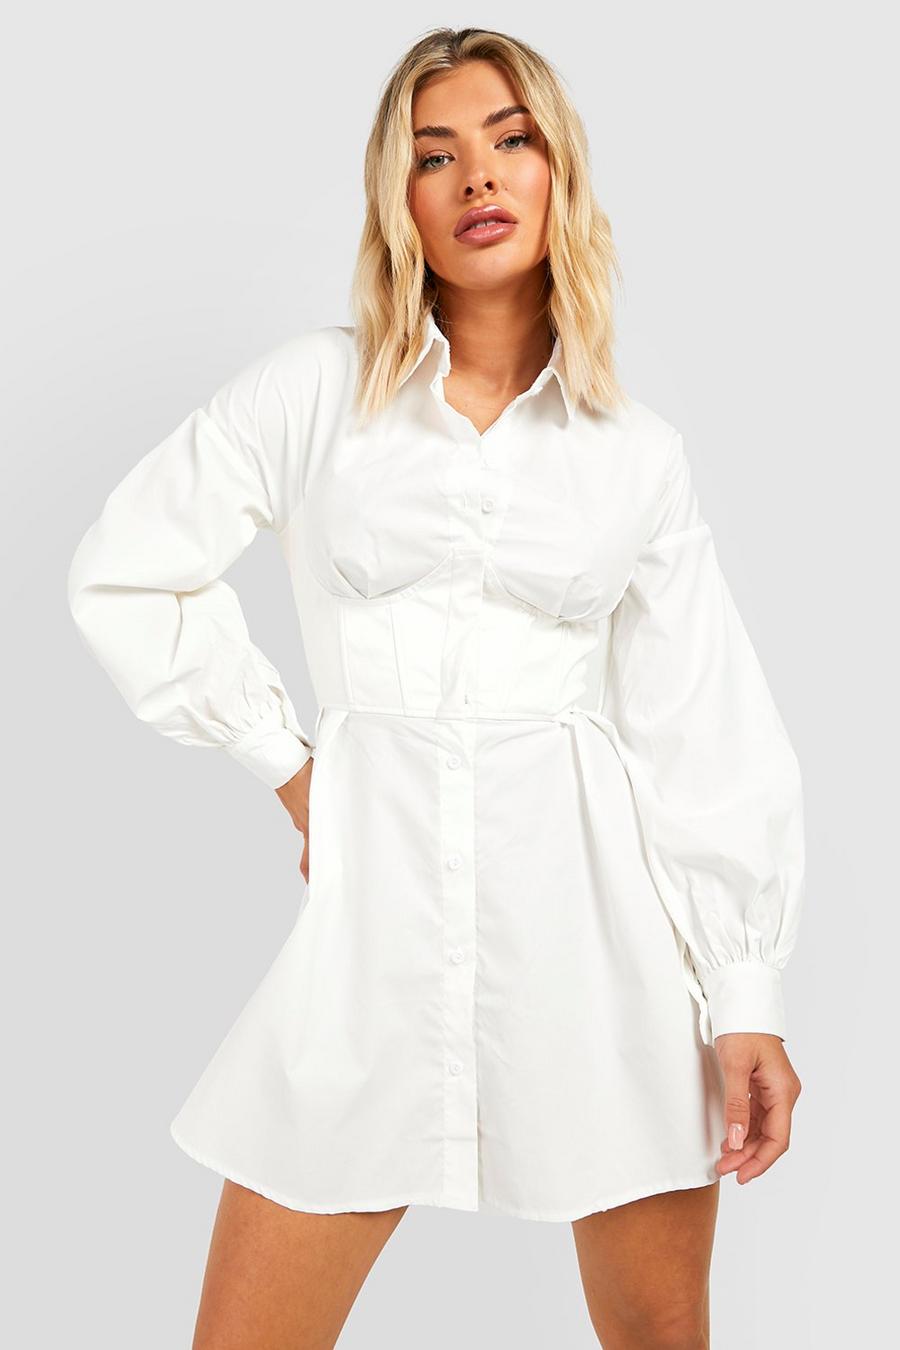 Ivory bianco Shirt Dress With Leather Look Corset